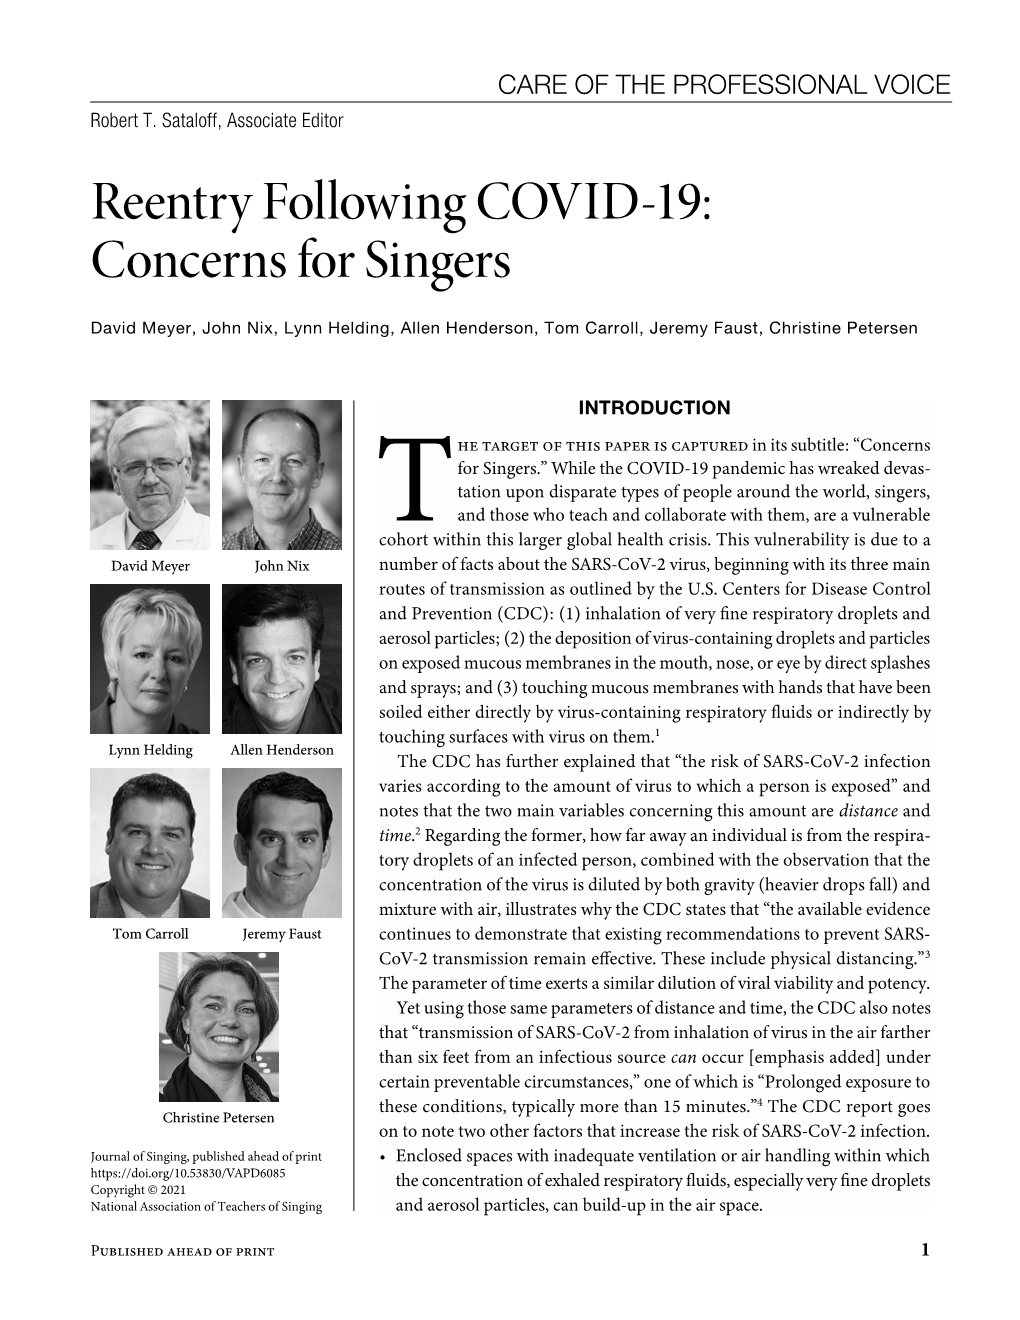 Reentry Following COVID-19: Concerns for Singers